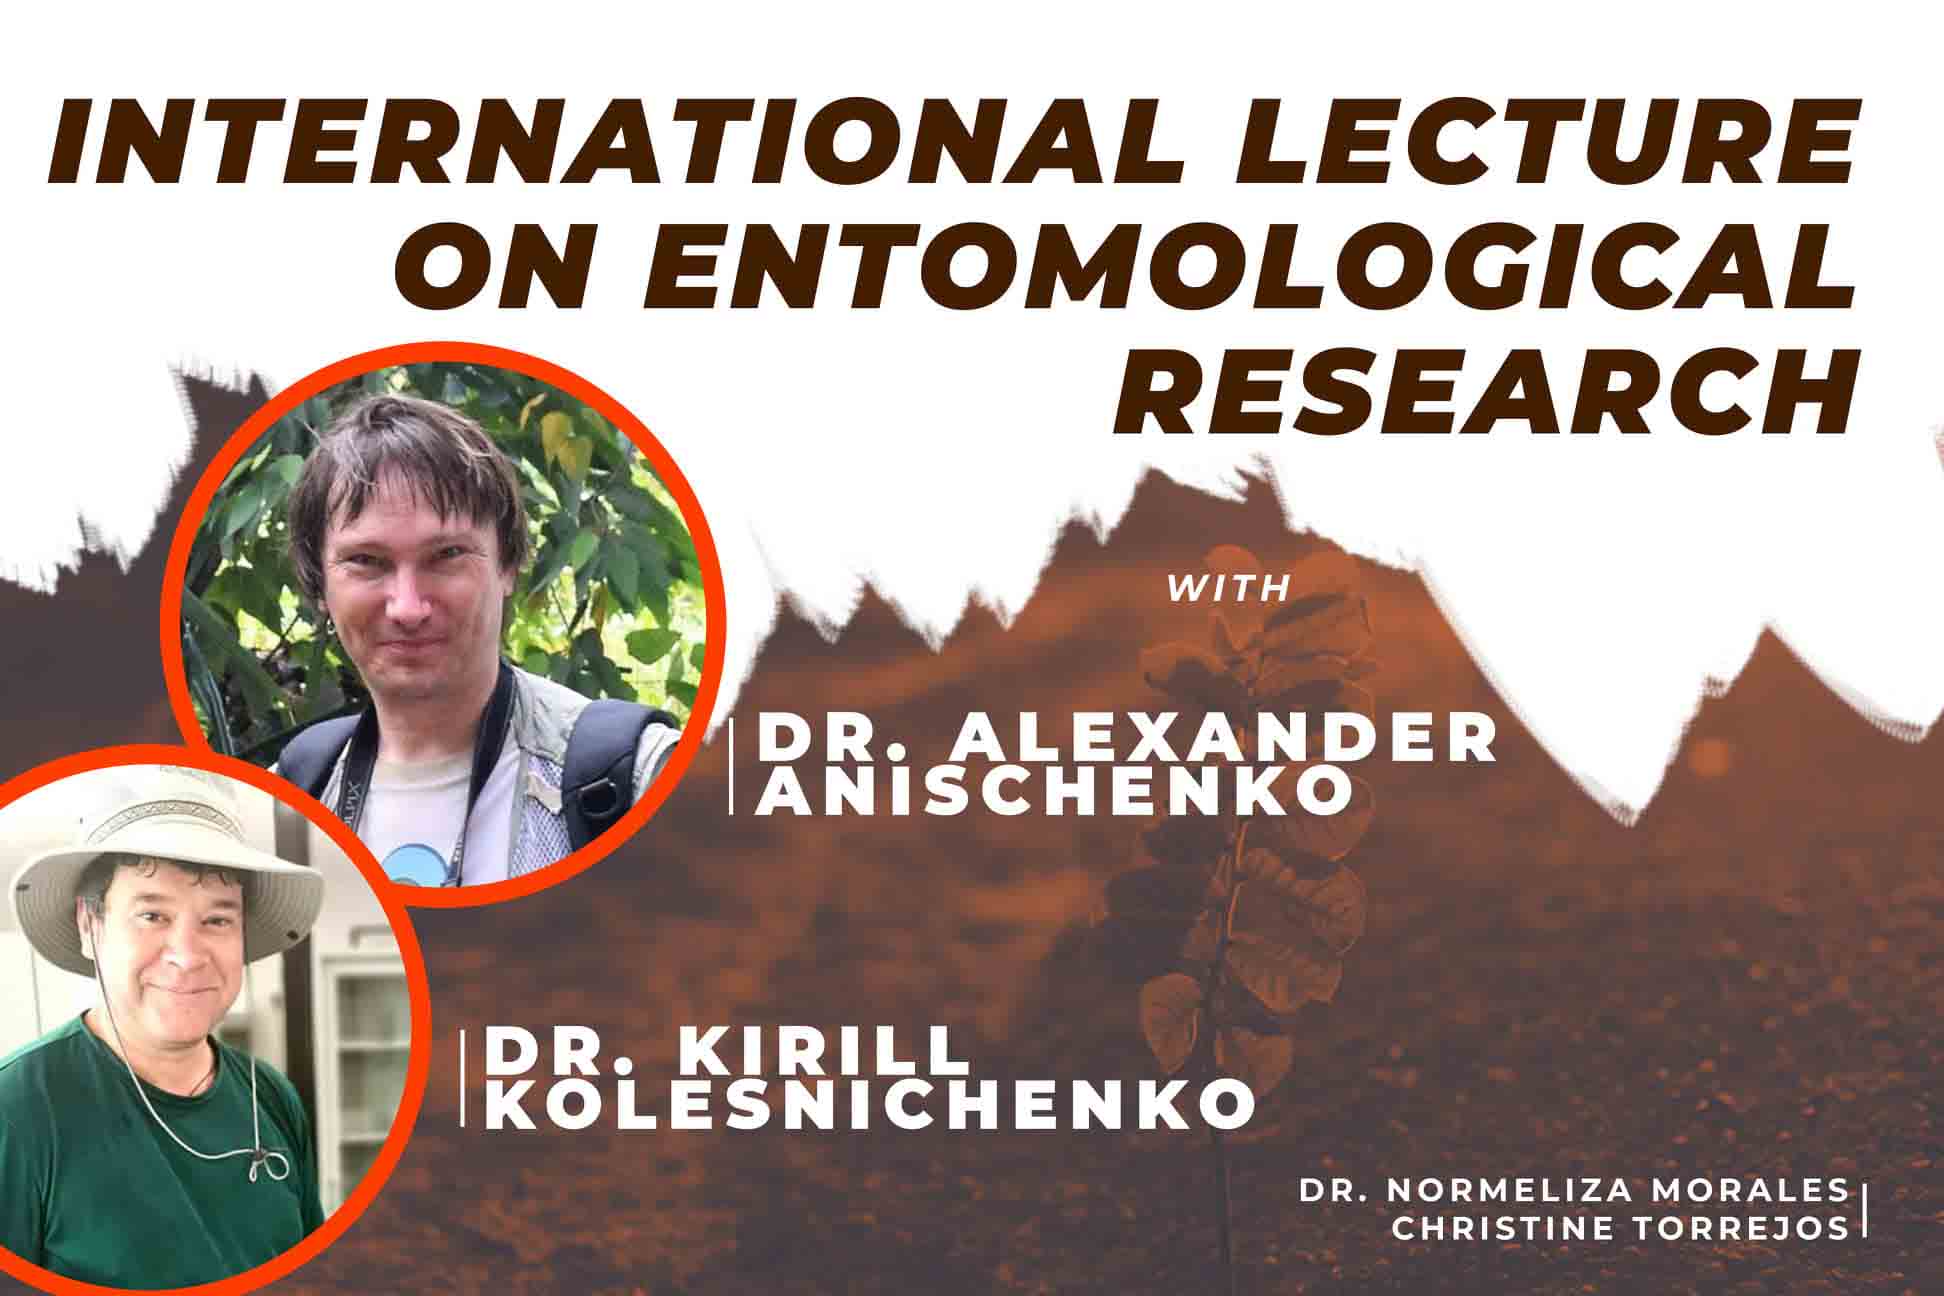 UM RPC's foreign fellows in Entomology hold public lecture